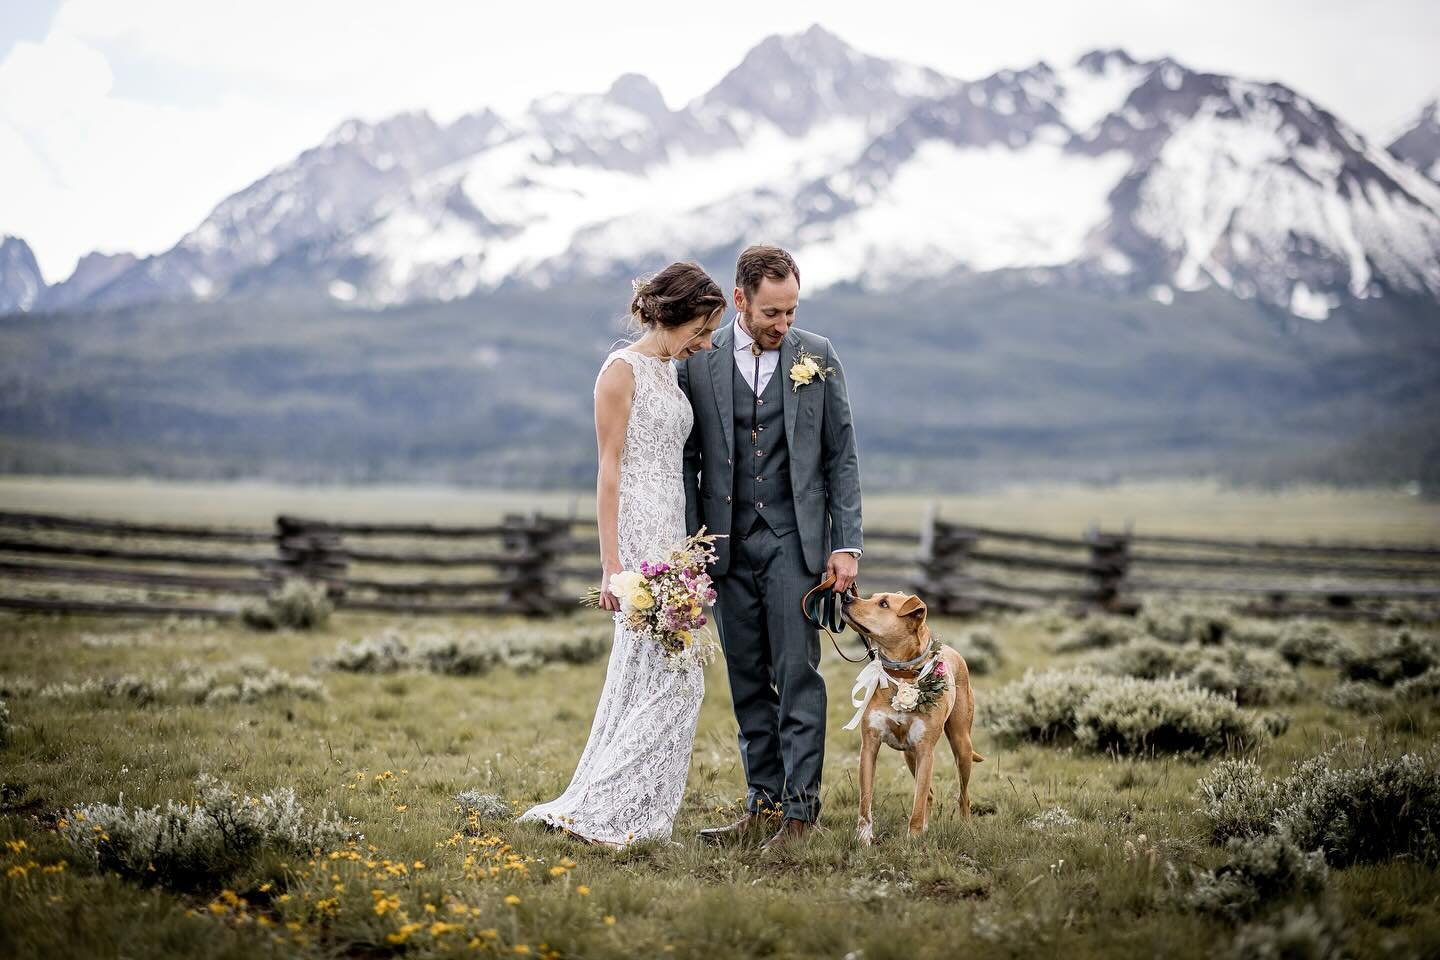 Happy National Pet Day! 🐾

Thinking about including your fur baby in your wedding? Here are a few ways to do so:

&bull; Walk down the aisle with your pet by your side
&bull; Have your pet take on the role of ring bearer
&bull; Incorporate your pet&